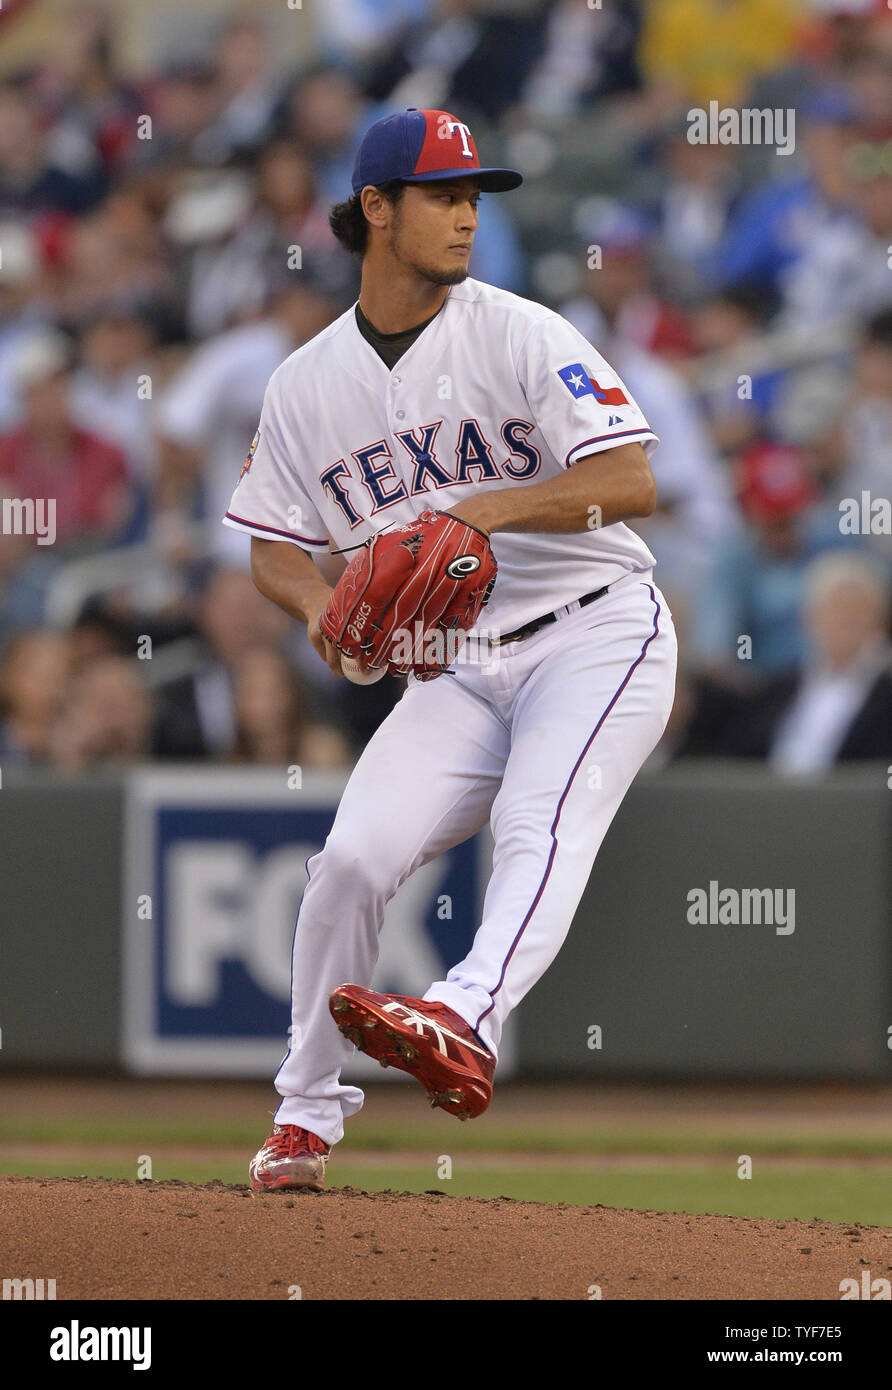 American League All-Star pitcher Yu Darvish, of the Texas Rangers